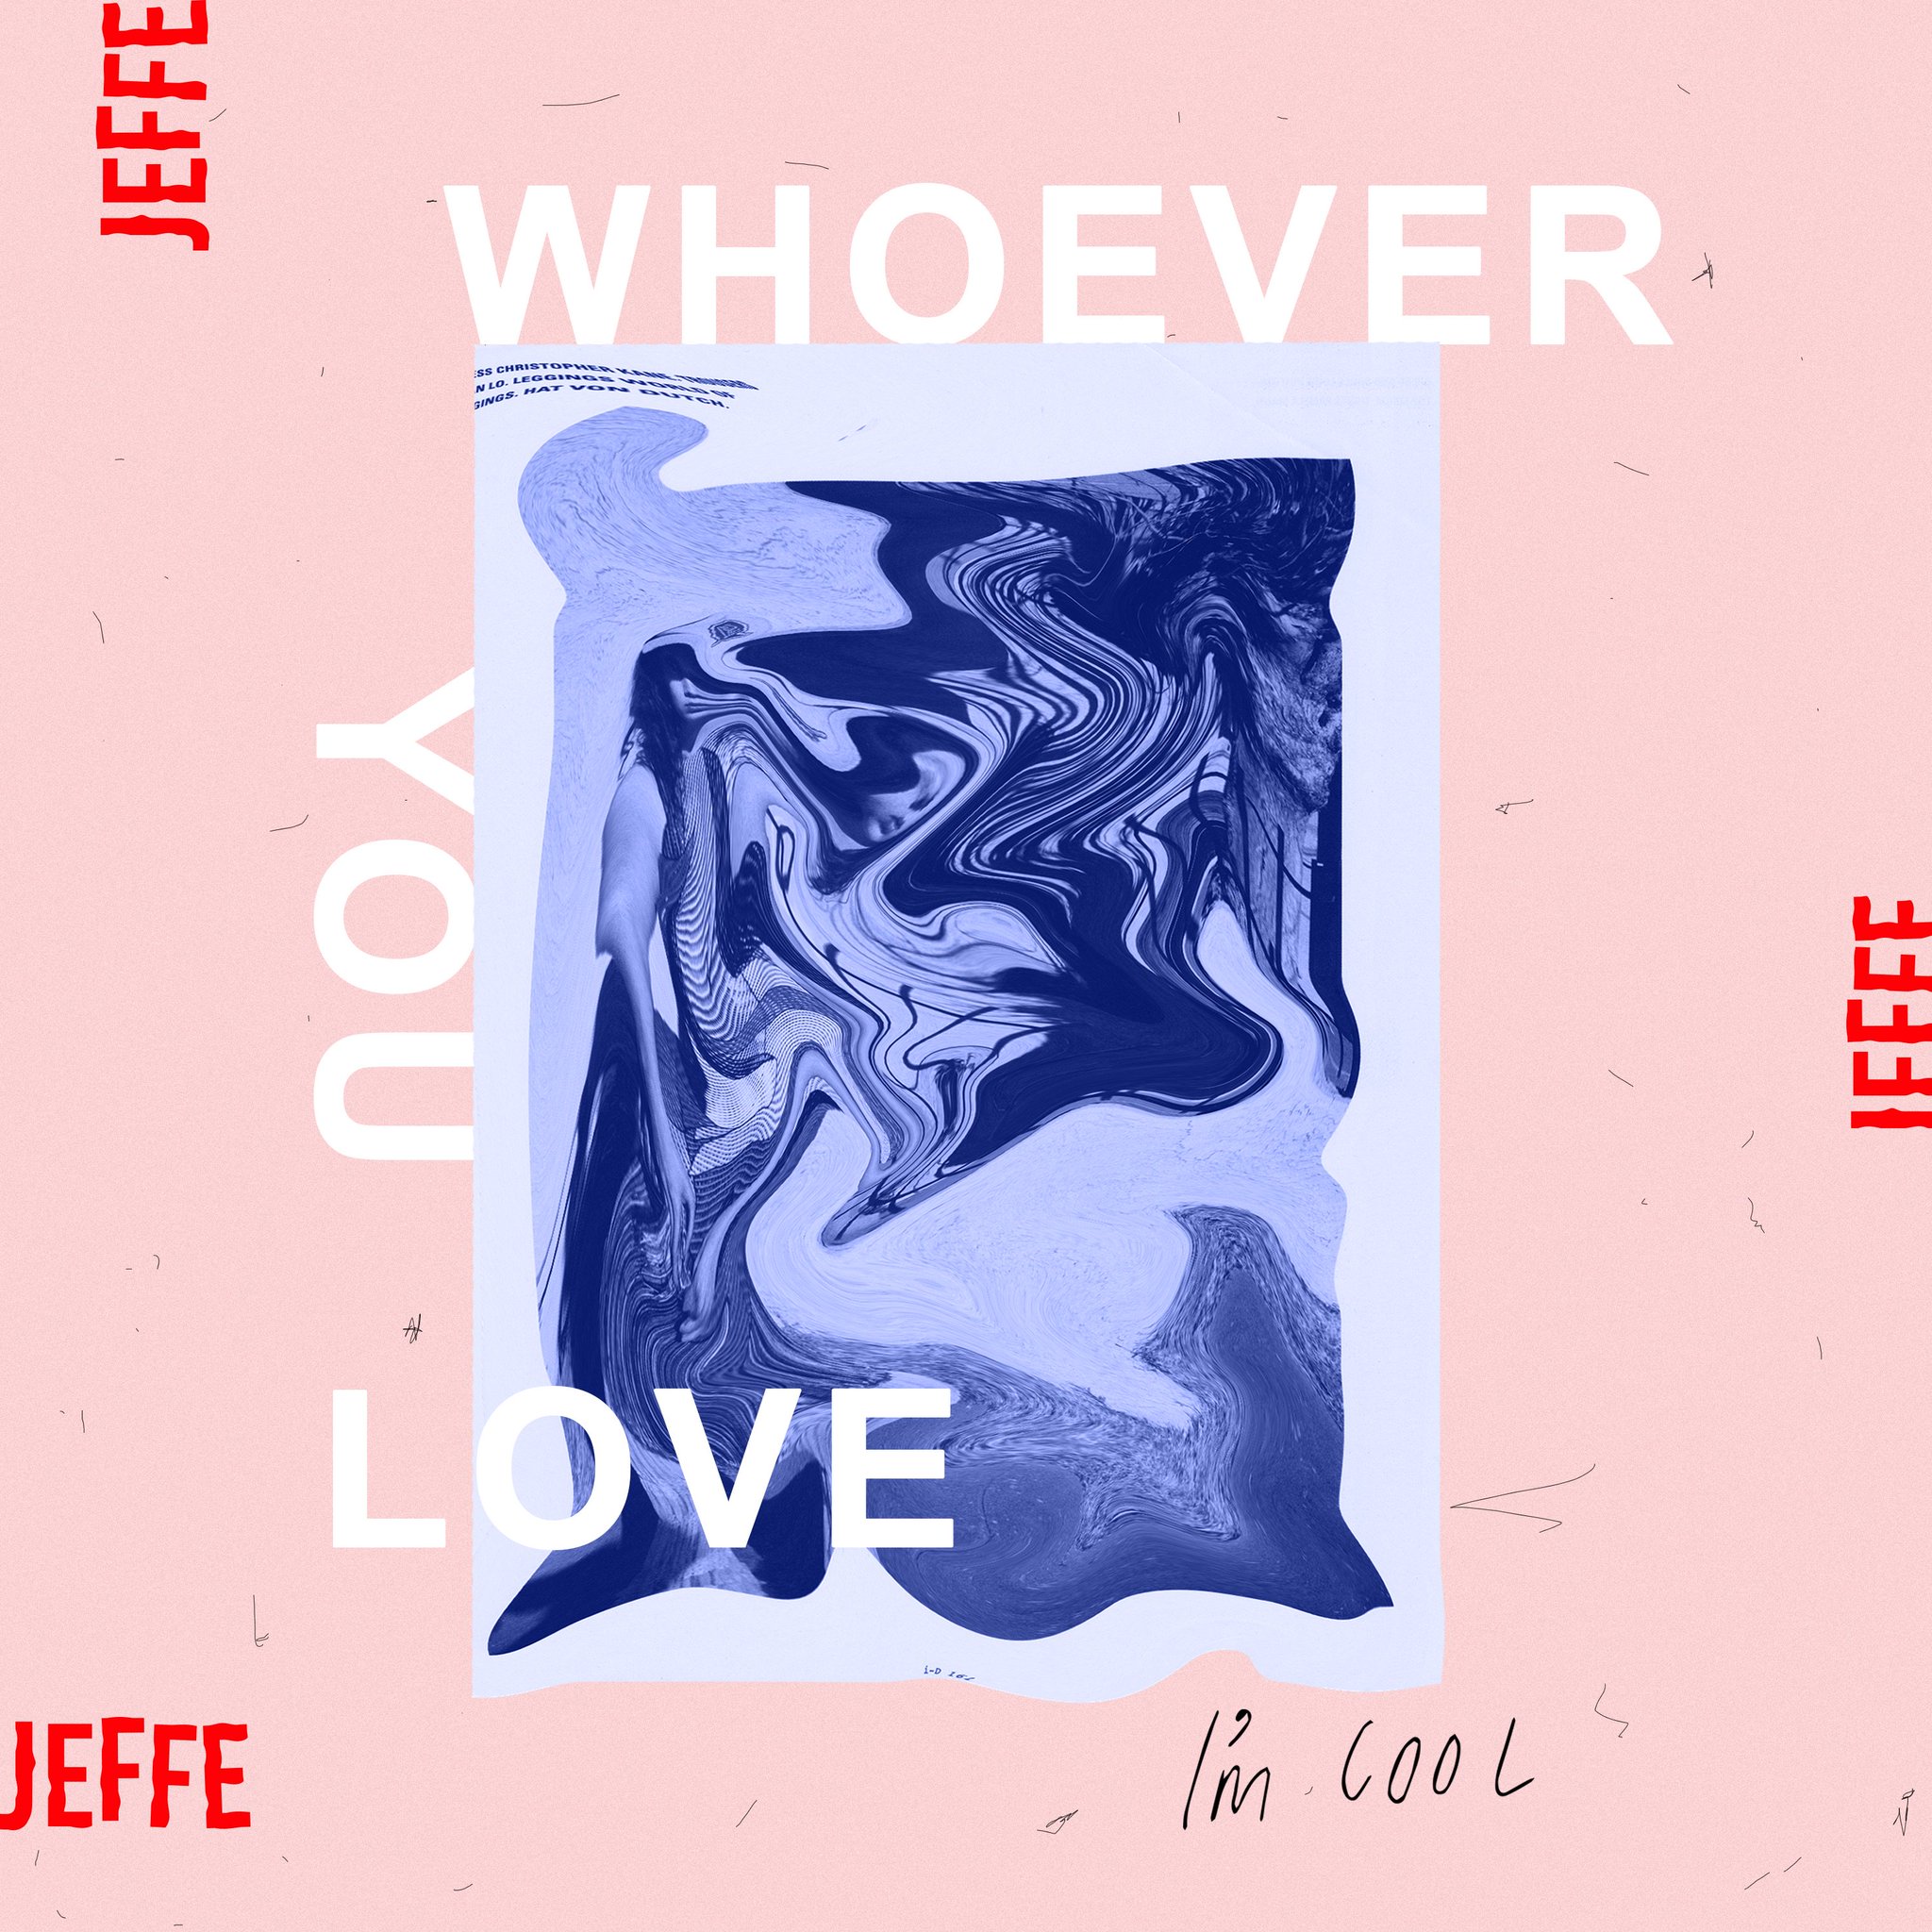 Jeffe - Whoever You Love I'm Cool art